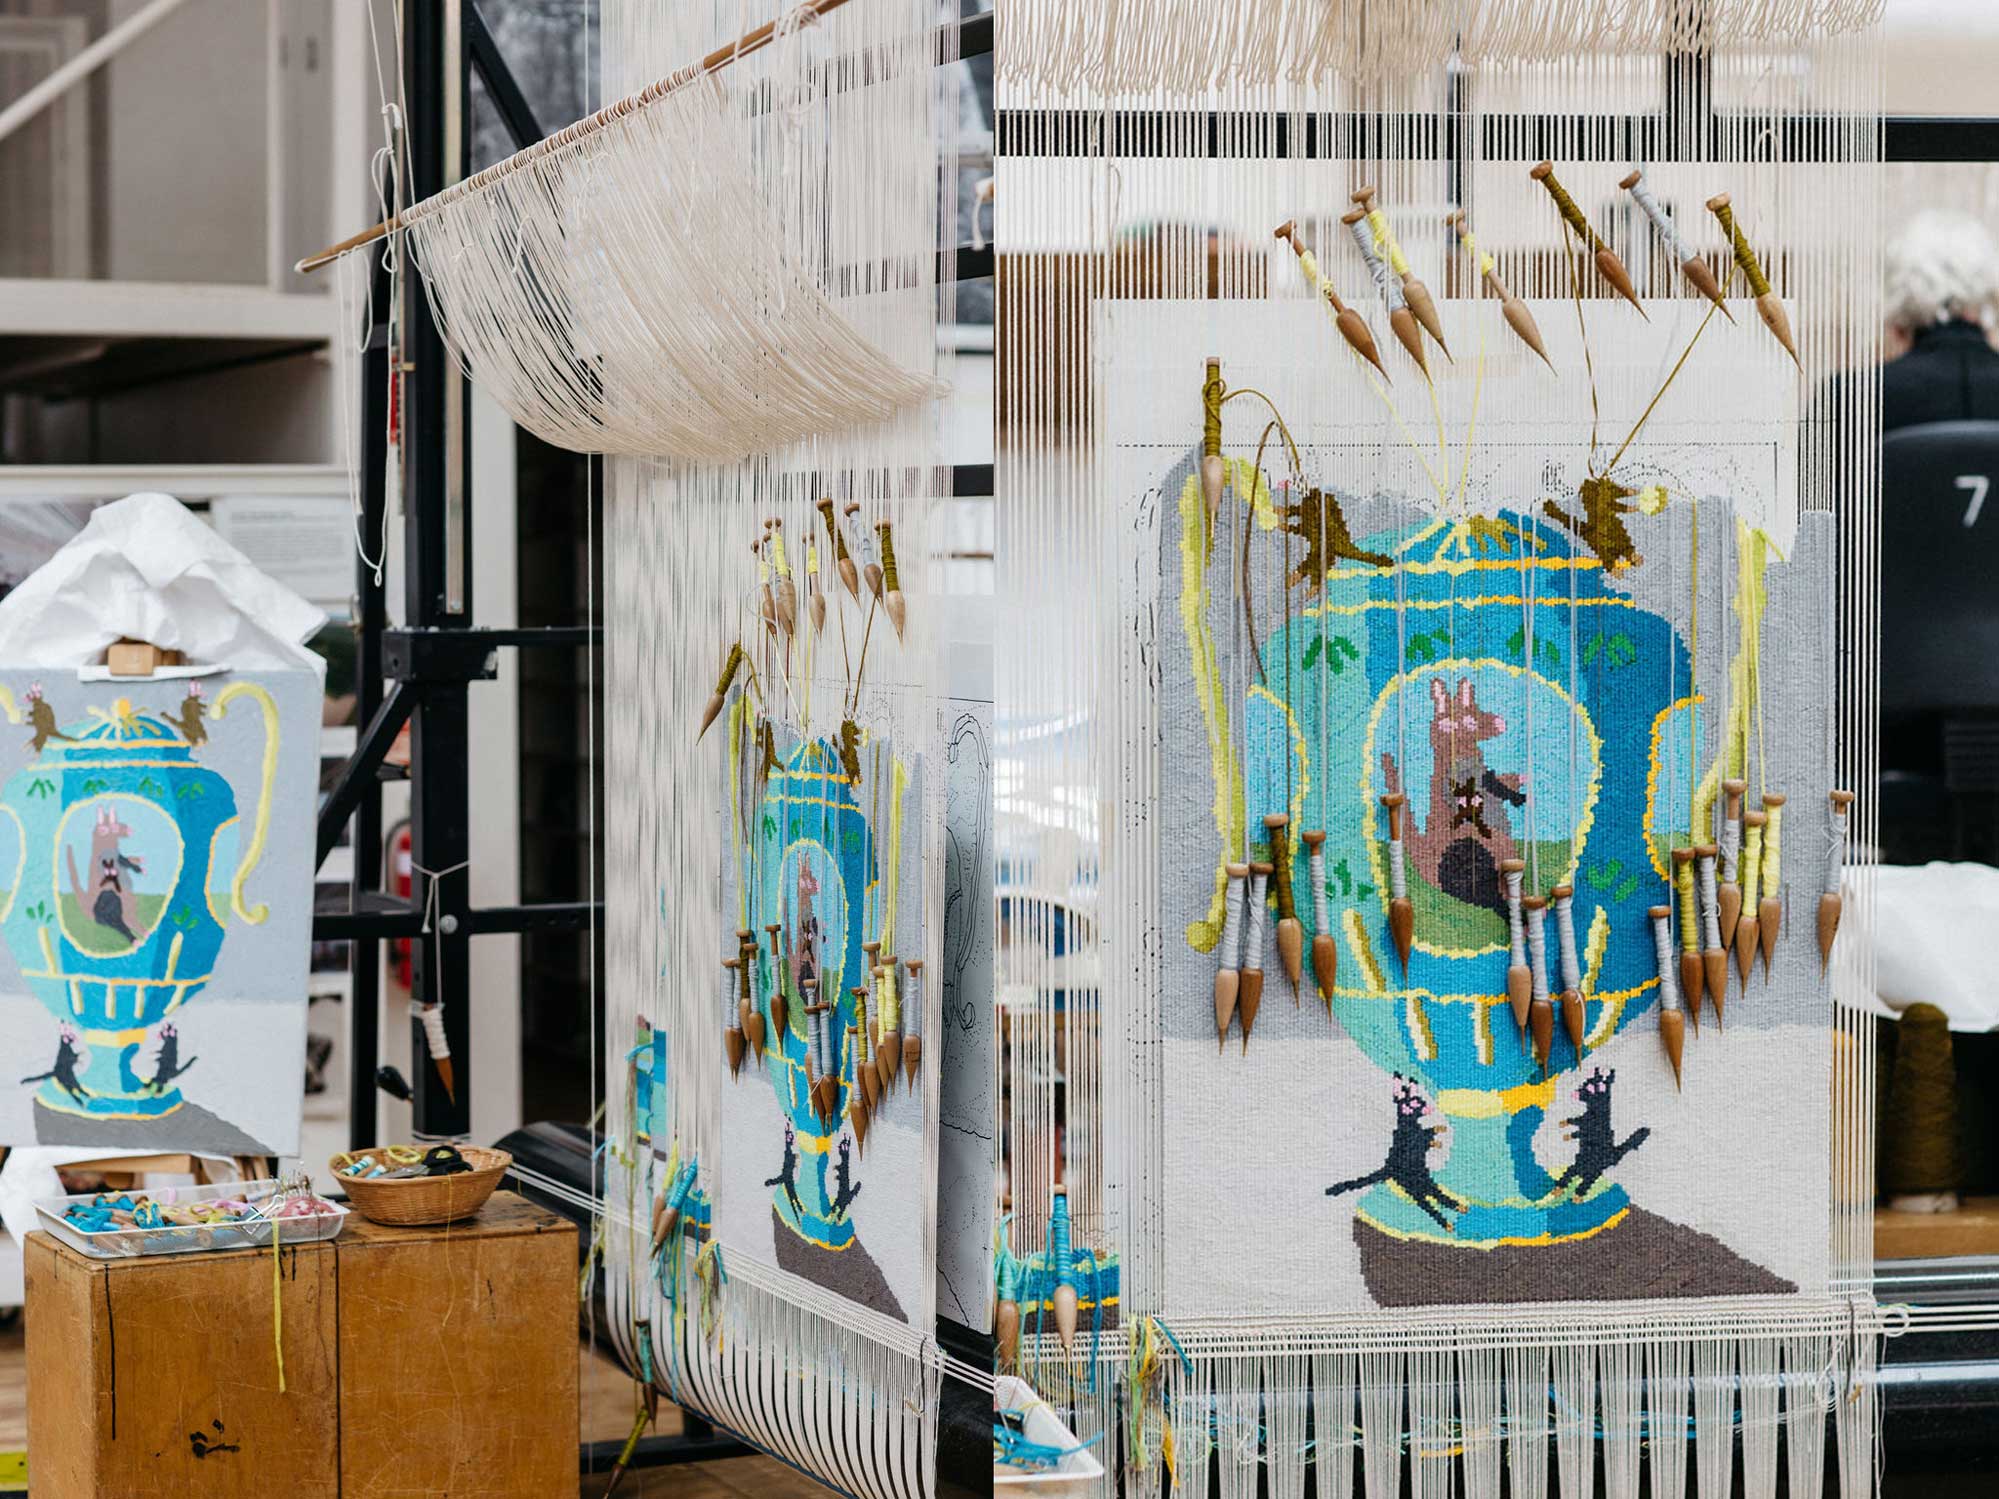 Tapestry in progress: 'big kangaroo urn', 2021, designed by Troy Emery, woven by Emma Sulzer. Images courtesy of Marie- Luise Skibbe.